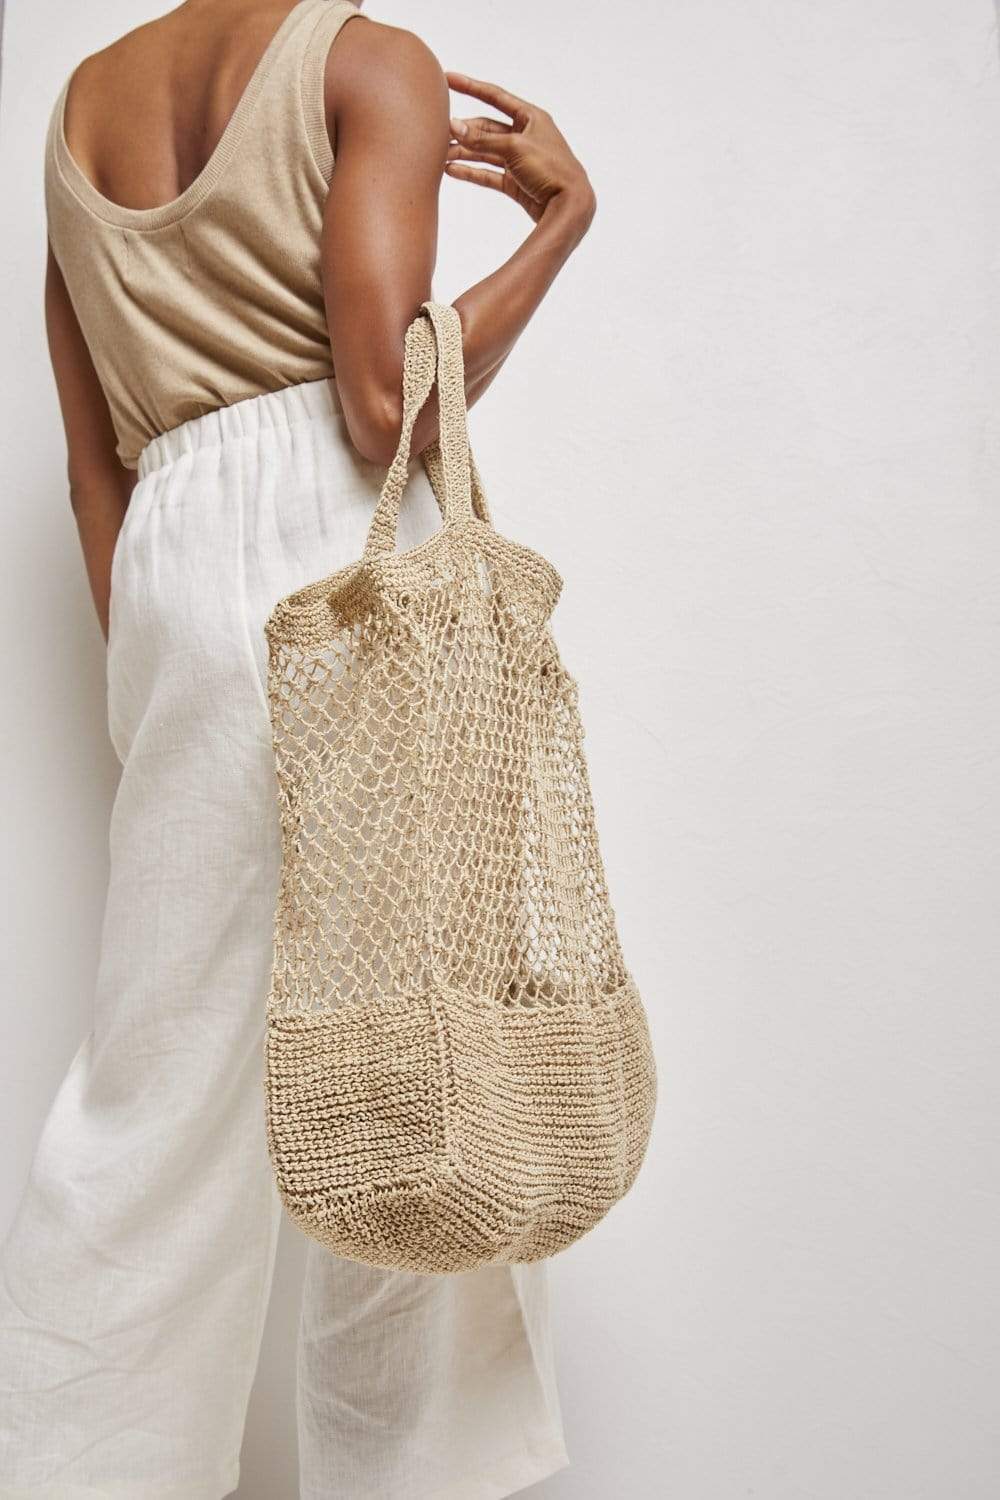 Learn to Make Woven Bags with Free Woven Bag Projects | Handwoven